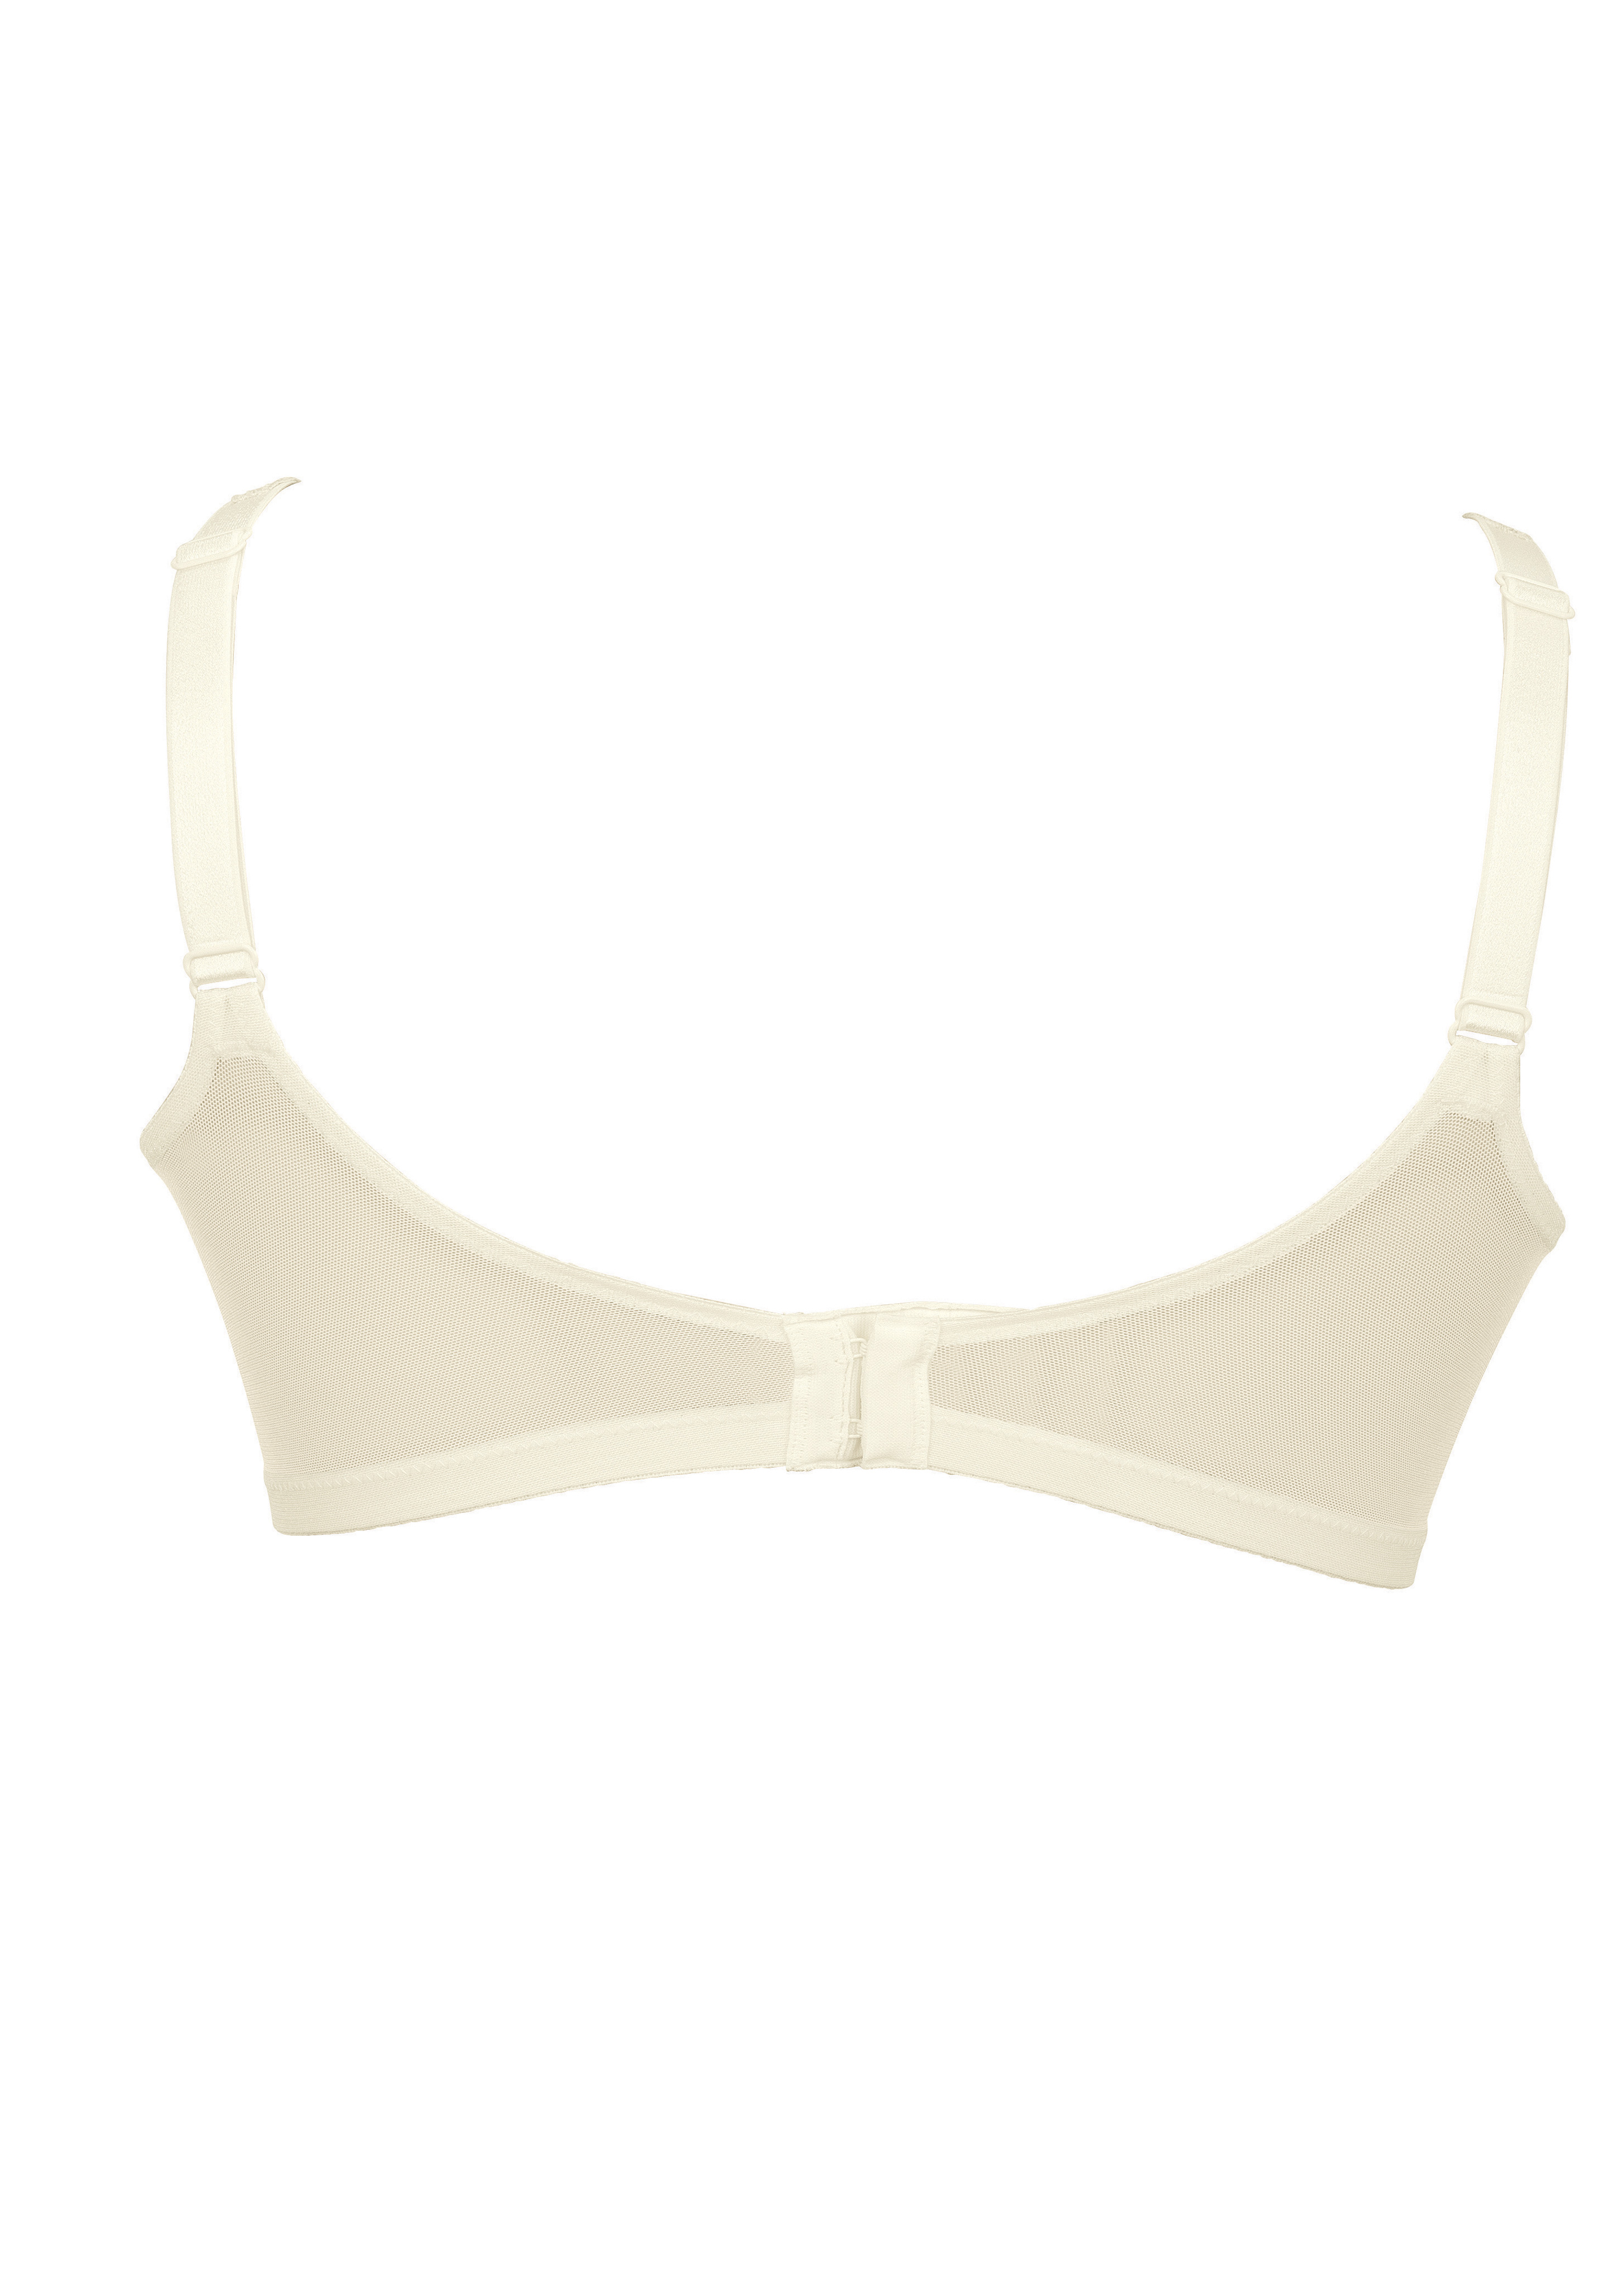 Soutien-gorge Prothses Anita Care  Champagne